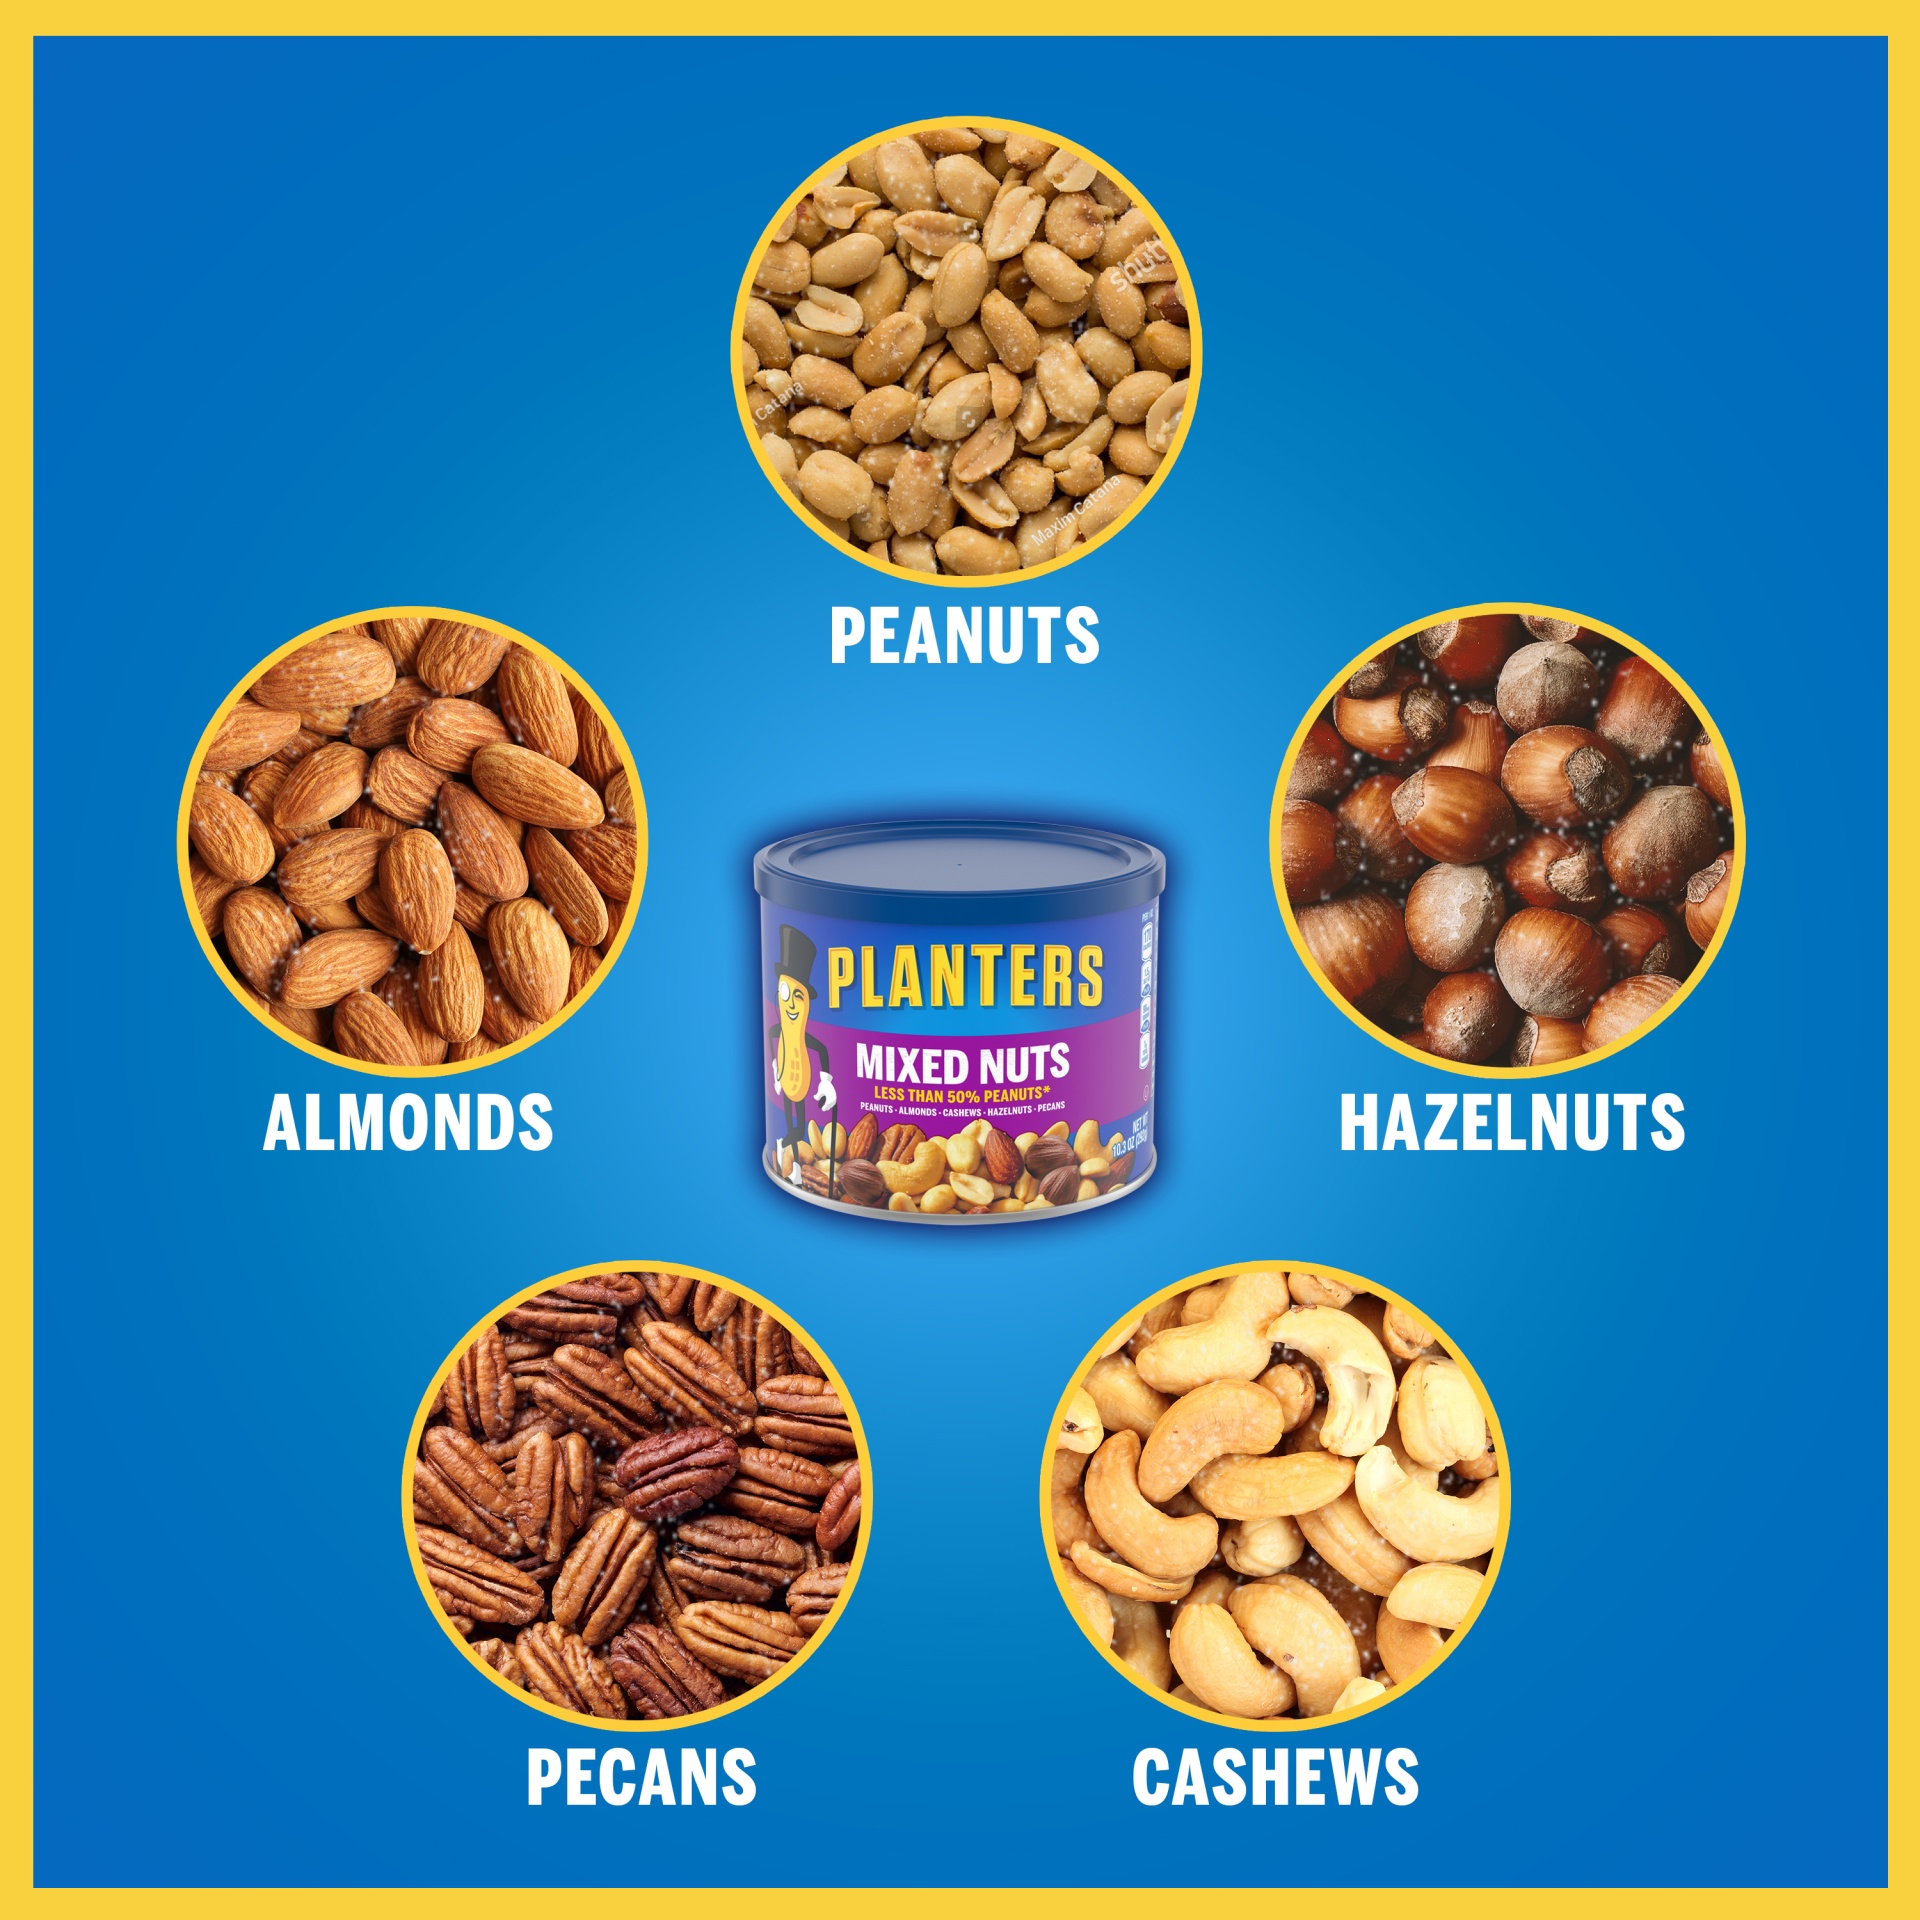 slide 5 of 15, Planters Mixed Nuts Less Than 50% Peanuts with Peanuts, Almonds, Cashews, Hazelnuts & Pecans, 10.3 oz